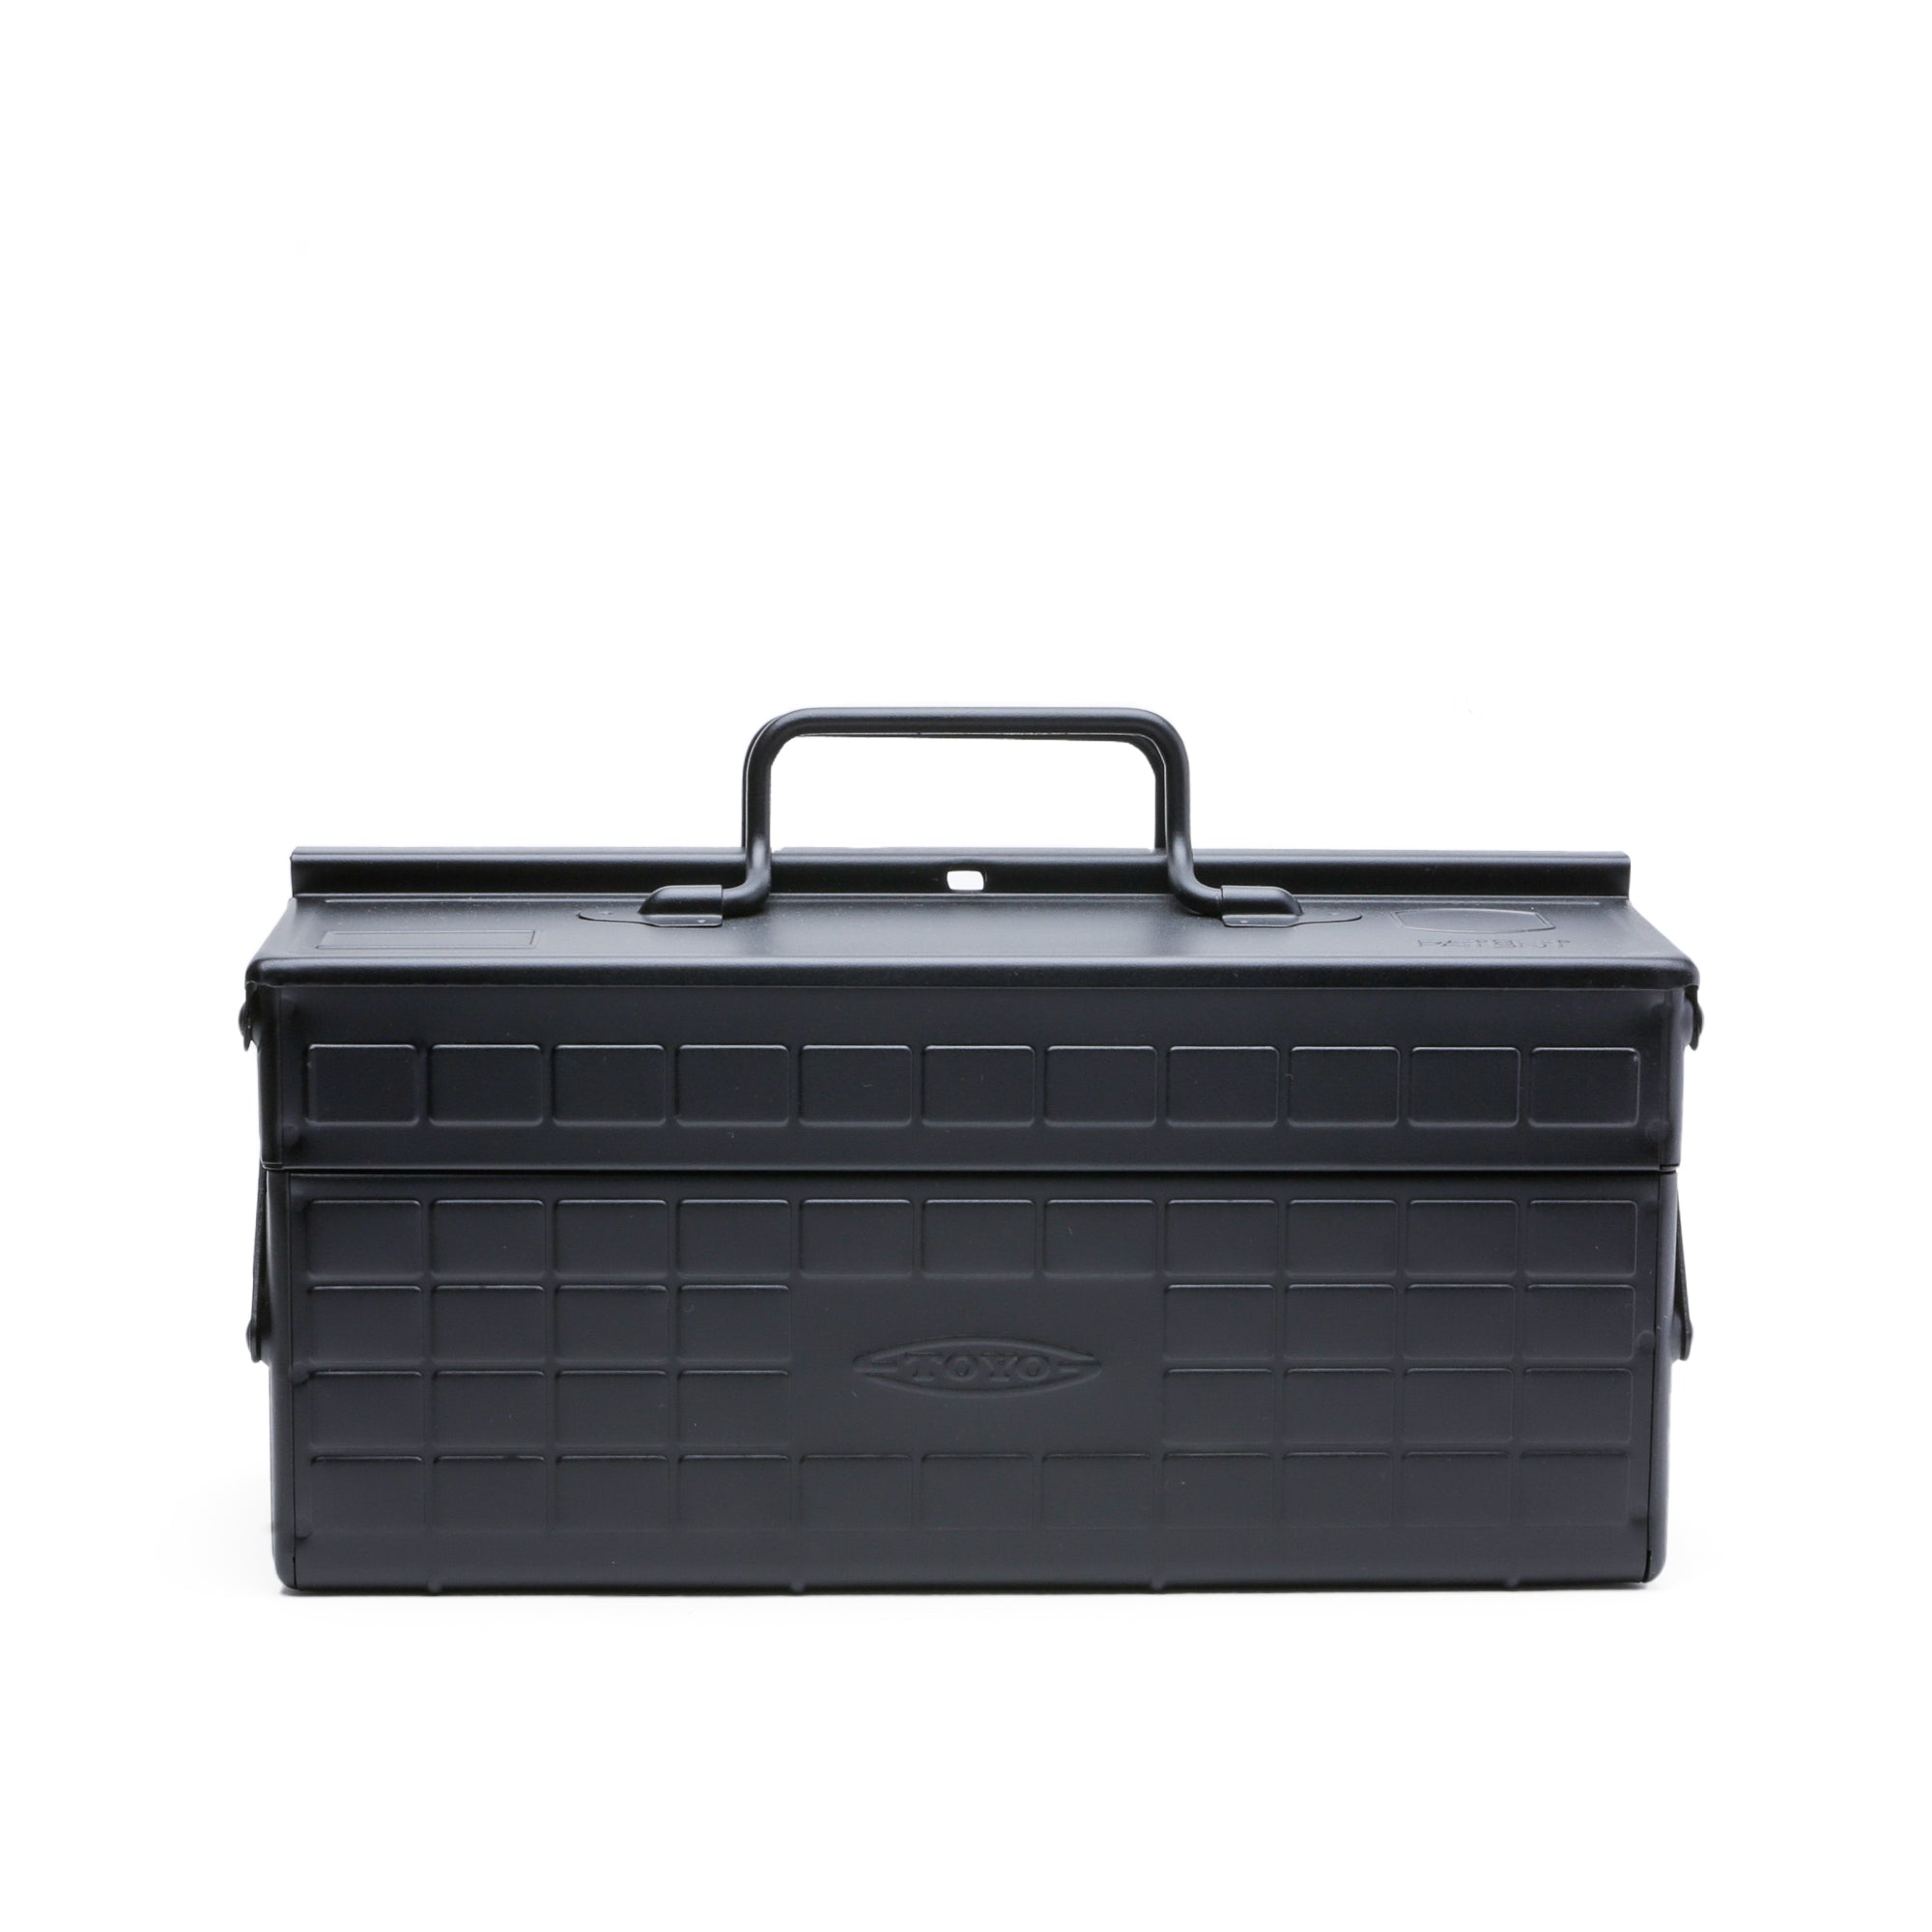 Black Toyo Steel Toolbox | Cantilever Lid | Upper Storage Trays, Style ST-350